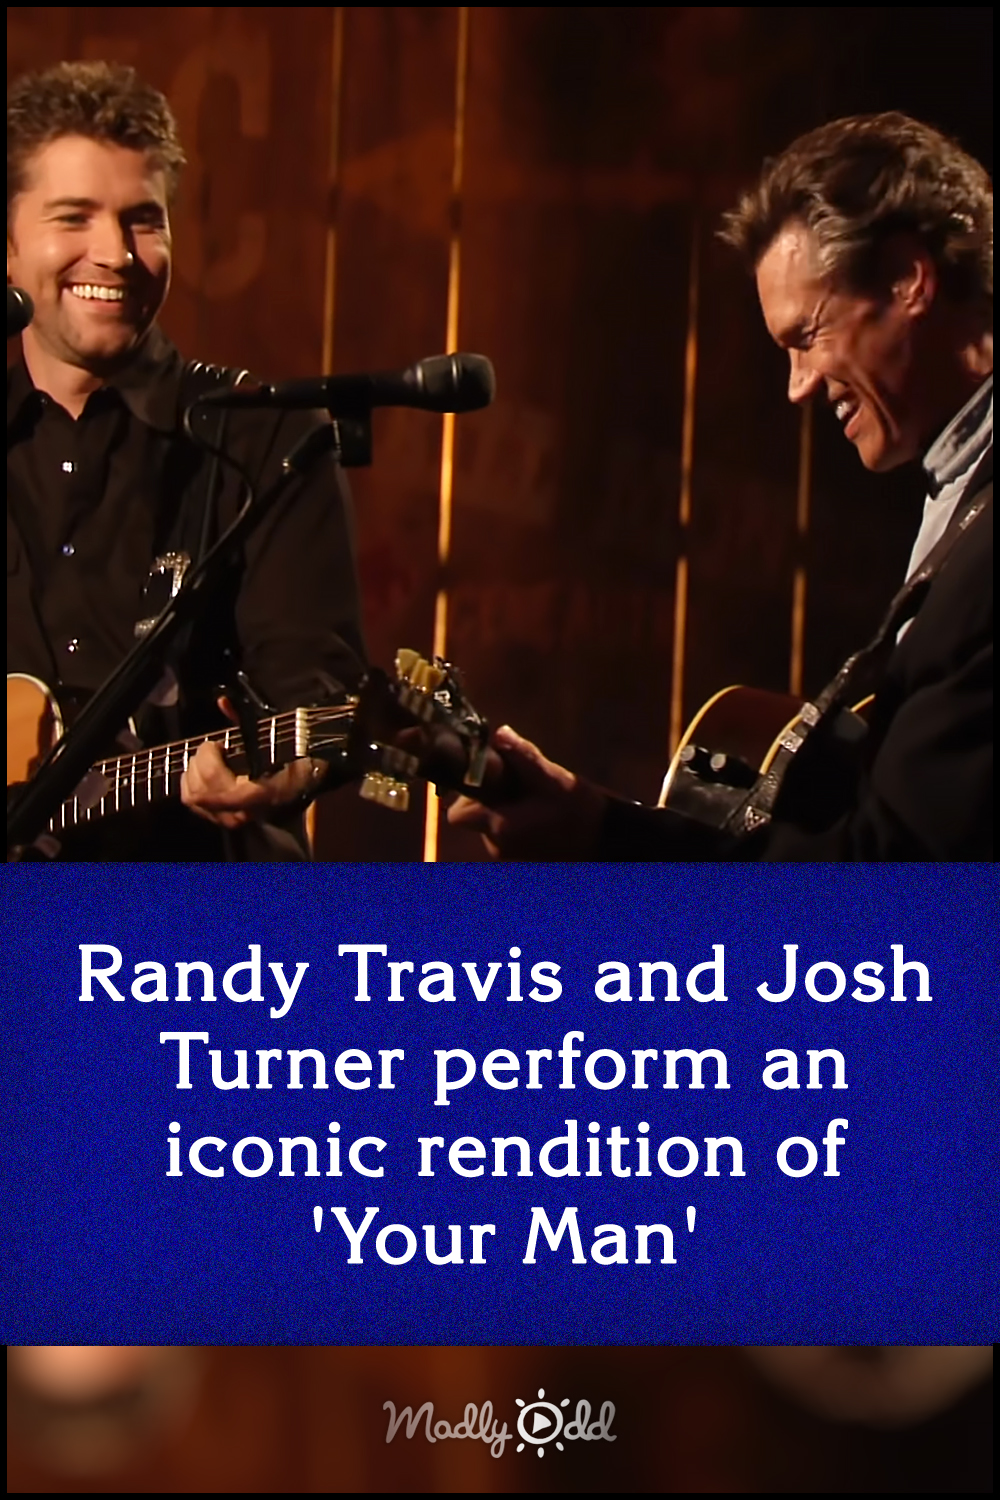 Randy Travis and Josh Turner perform an iconic rendition of \'Your Man\'